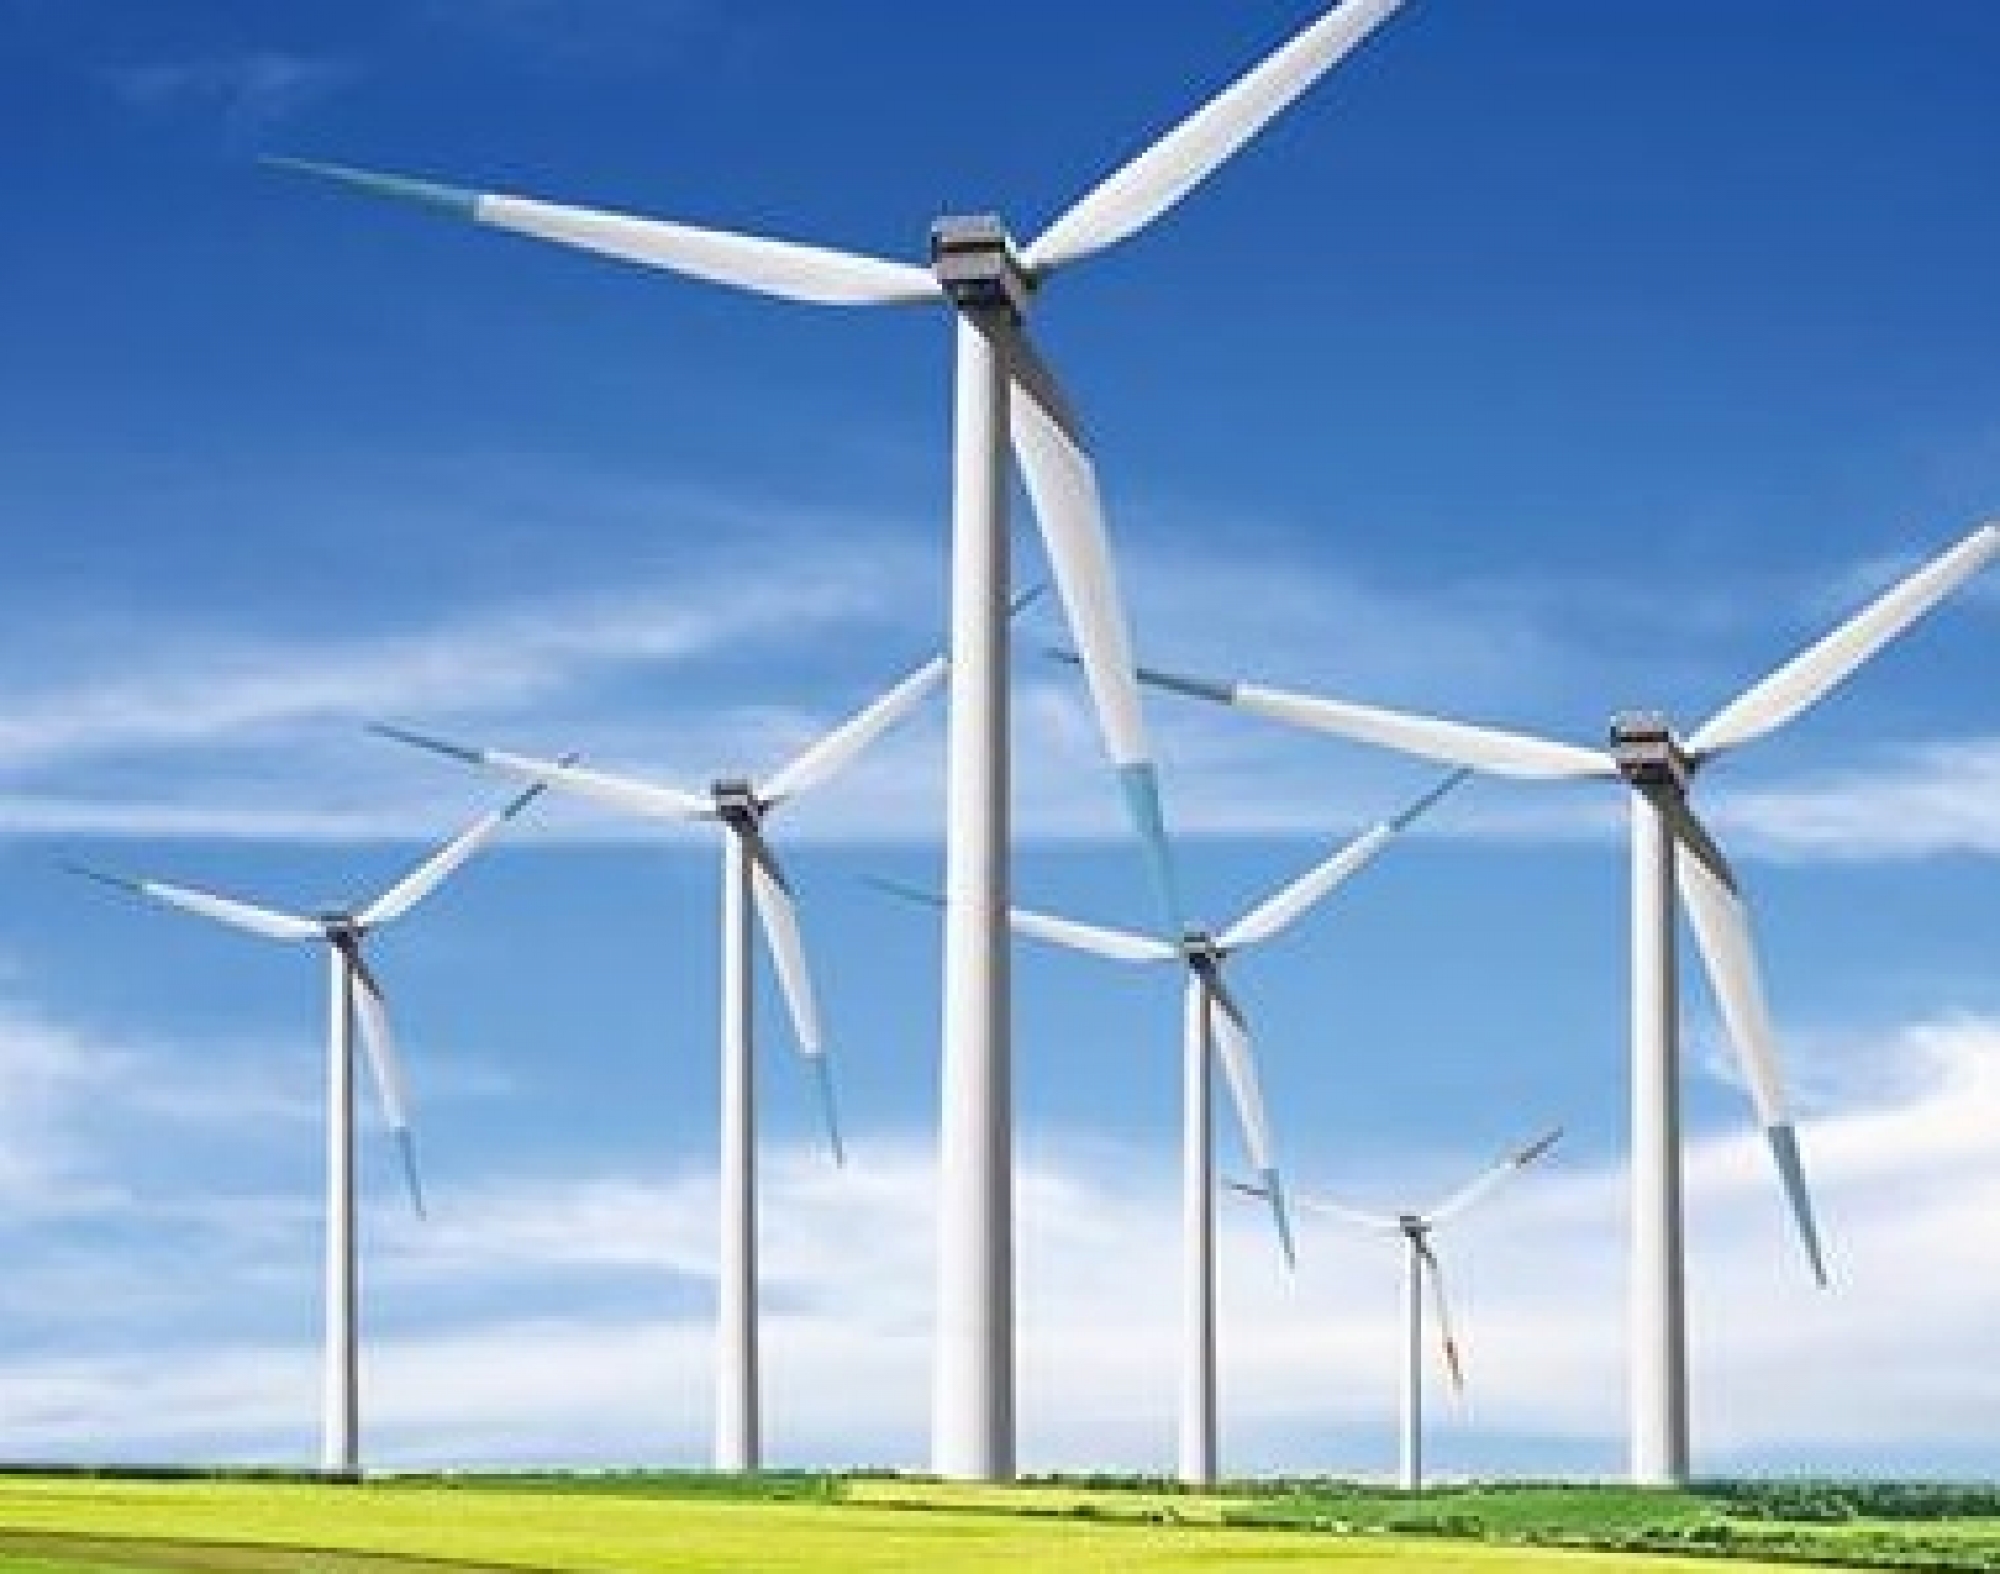 STRIX contributed for more 20 MW of clean energy